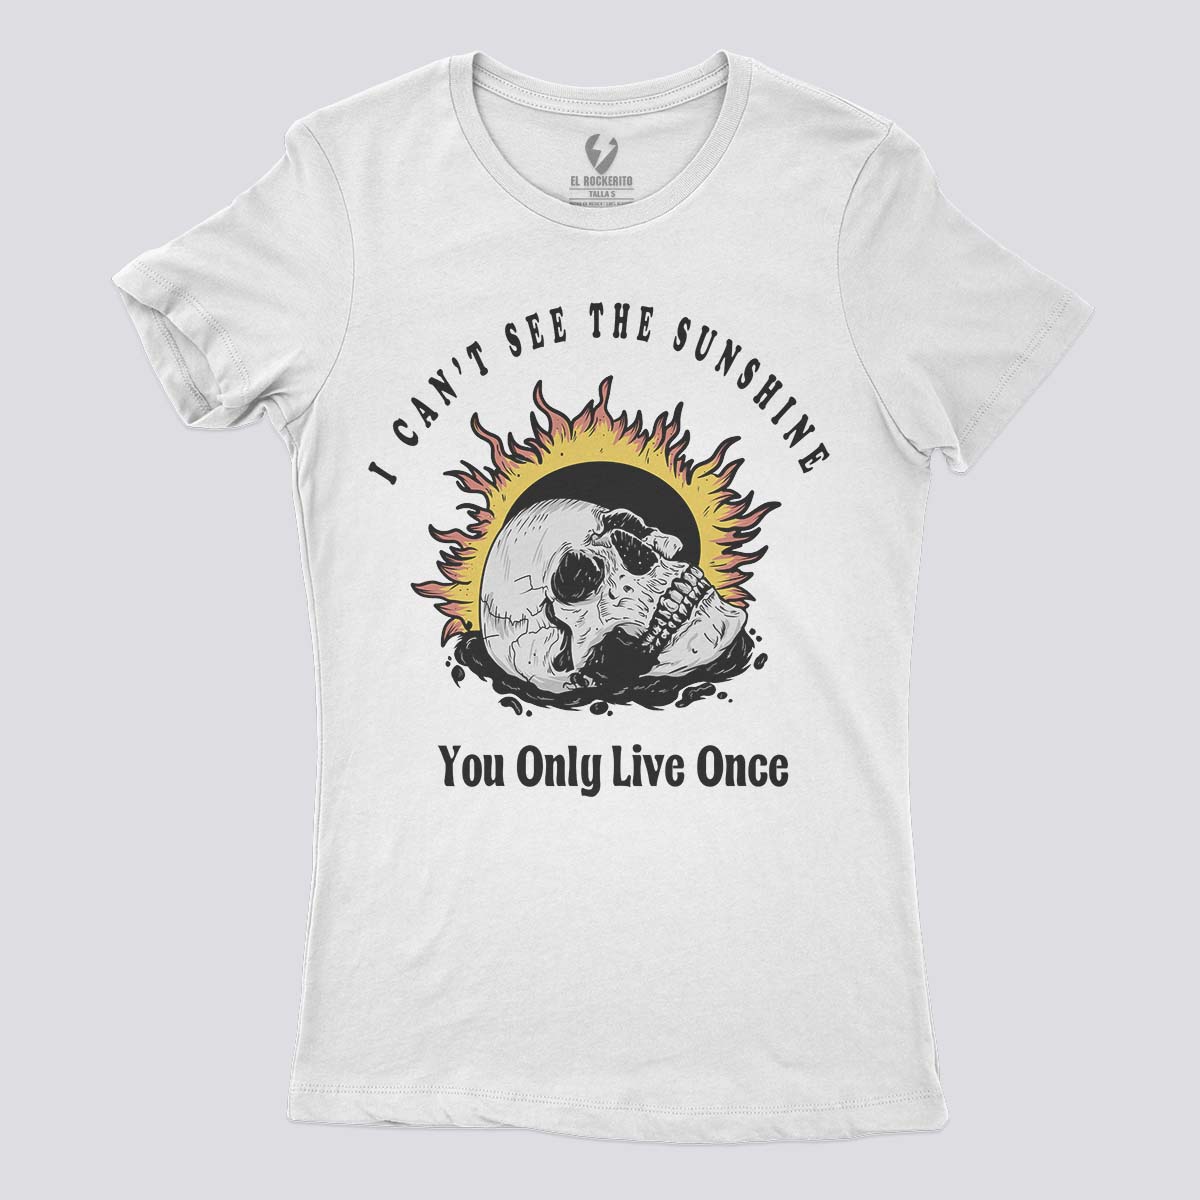 Playera algodón blanca mujer You Only Live Once The Strokes